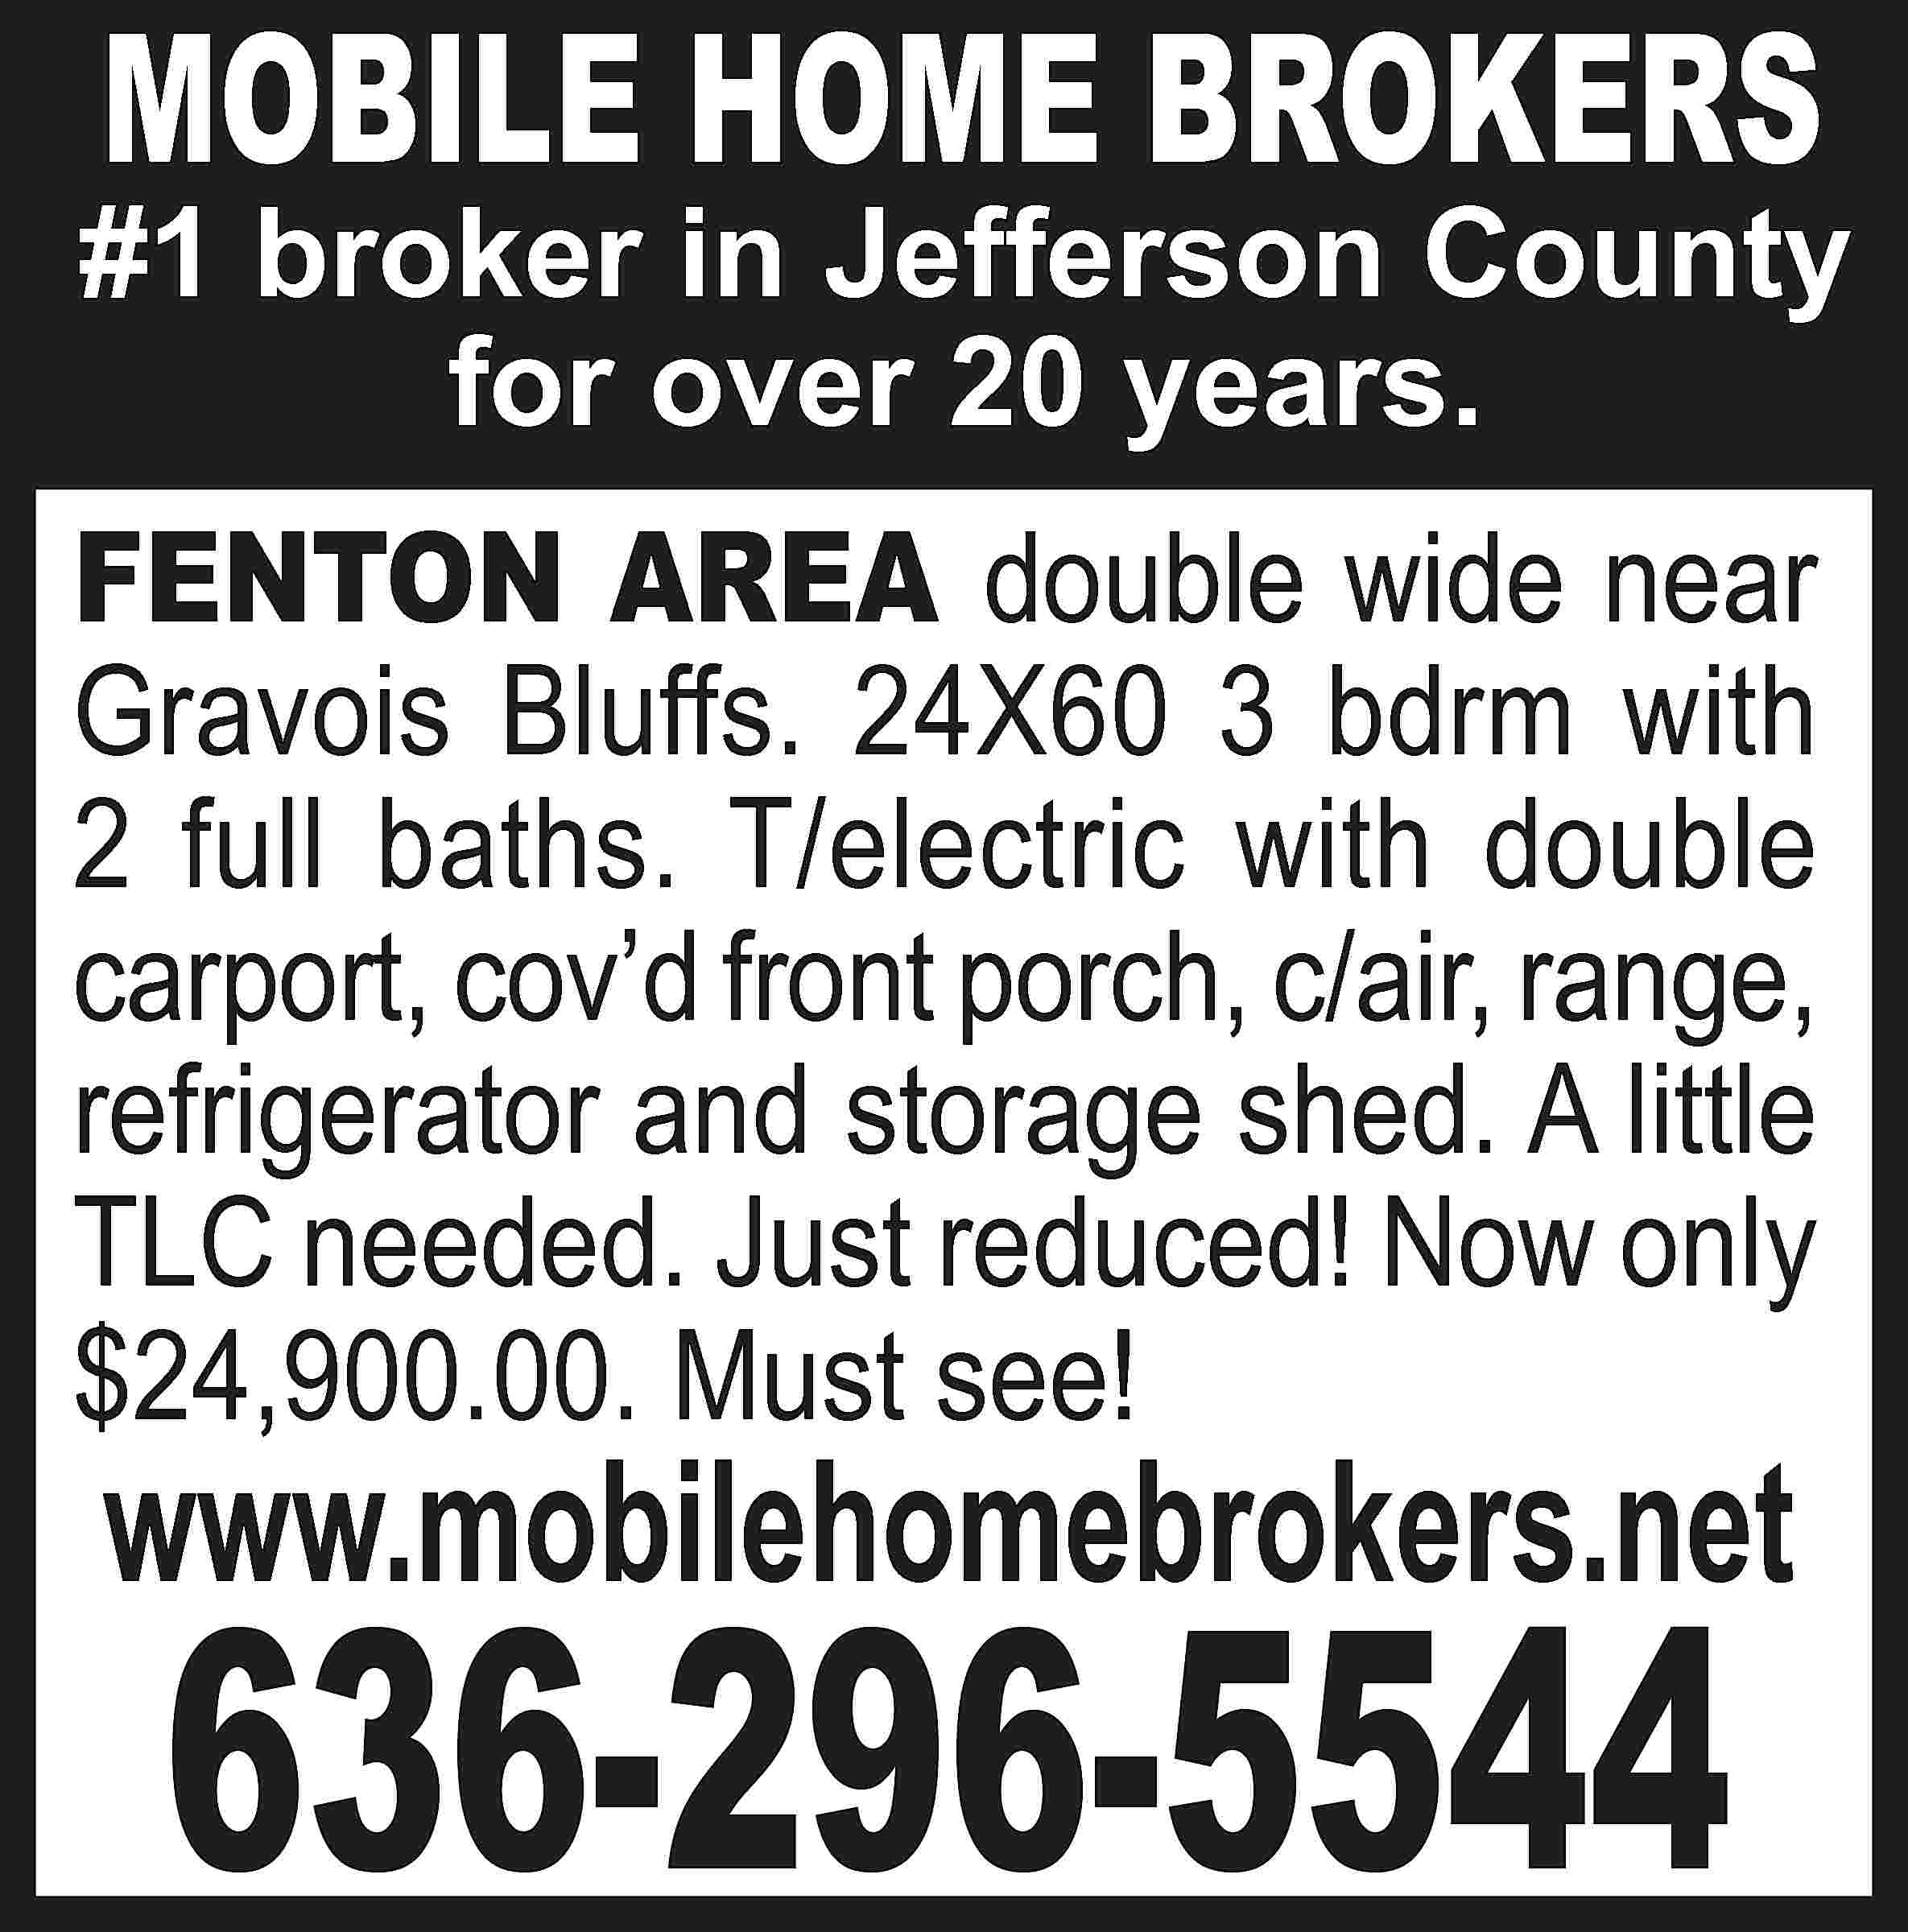 MOBILE HOME BROKERS #1 broker  MOBILE HOME BROKERS #1 broker in Jefferson County for over 20 years. FENTON AREA double wide near Gravois Bluffs. 24X60 3 bdrm with 2 full baths. T/electric with double carport, cov’d front porch, c/air, range, refrigerator and storage shed. A little TLC needed. Just reduced! Now only $24,900.00. Must see! www.mobilehomebrokers.net 636-296-5544